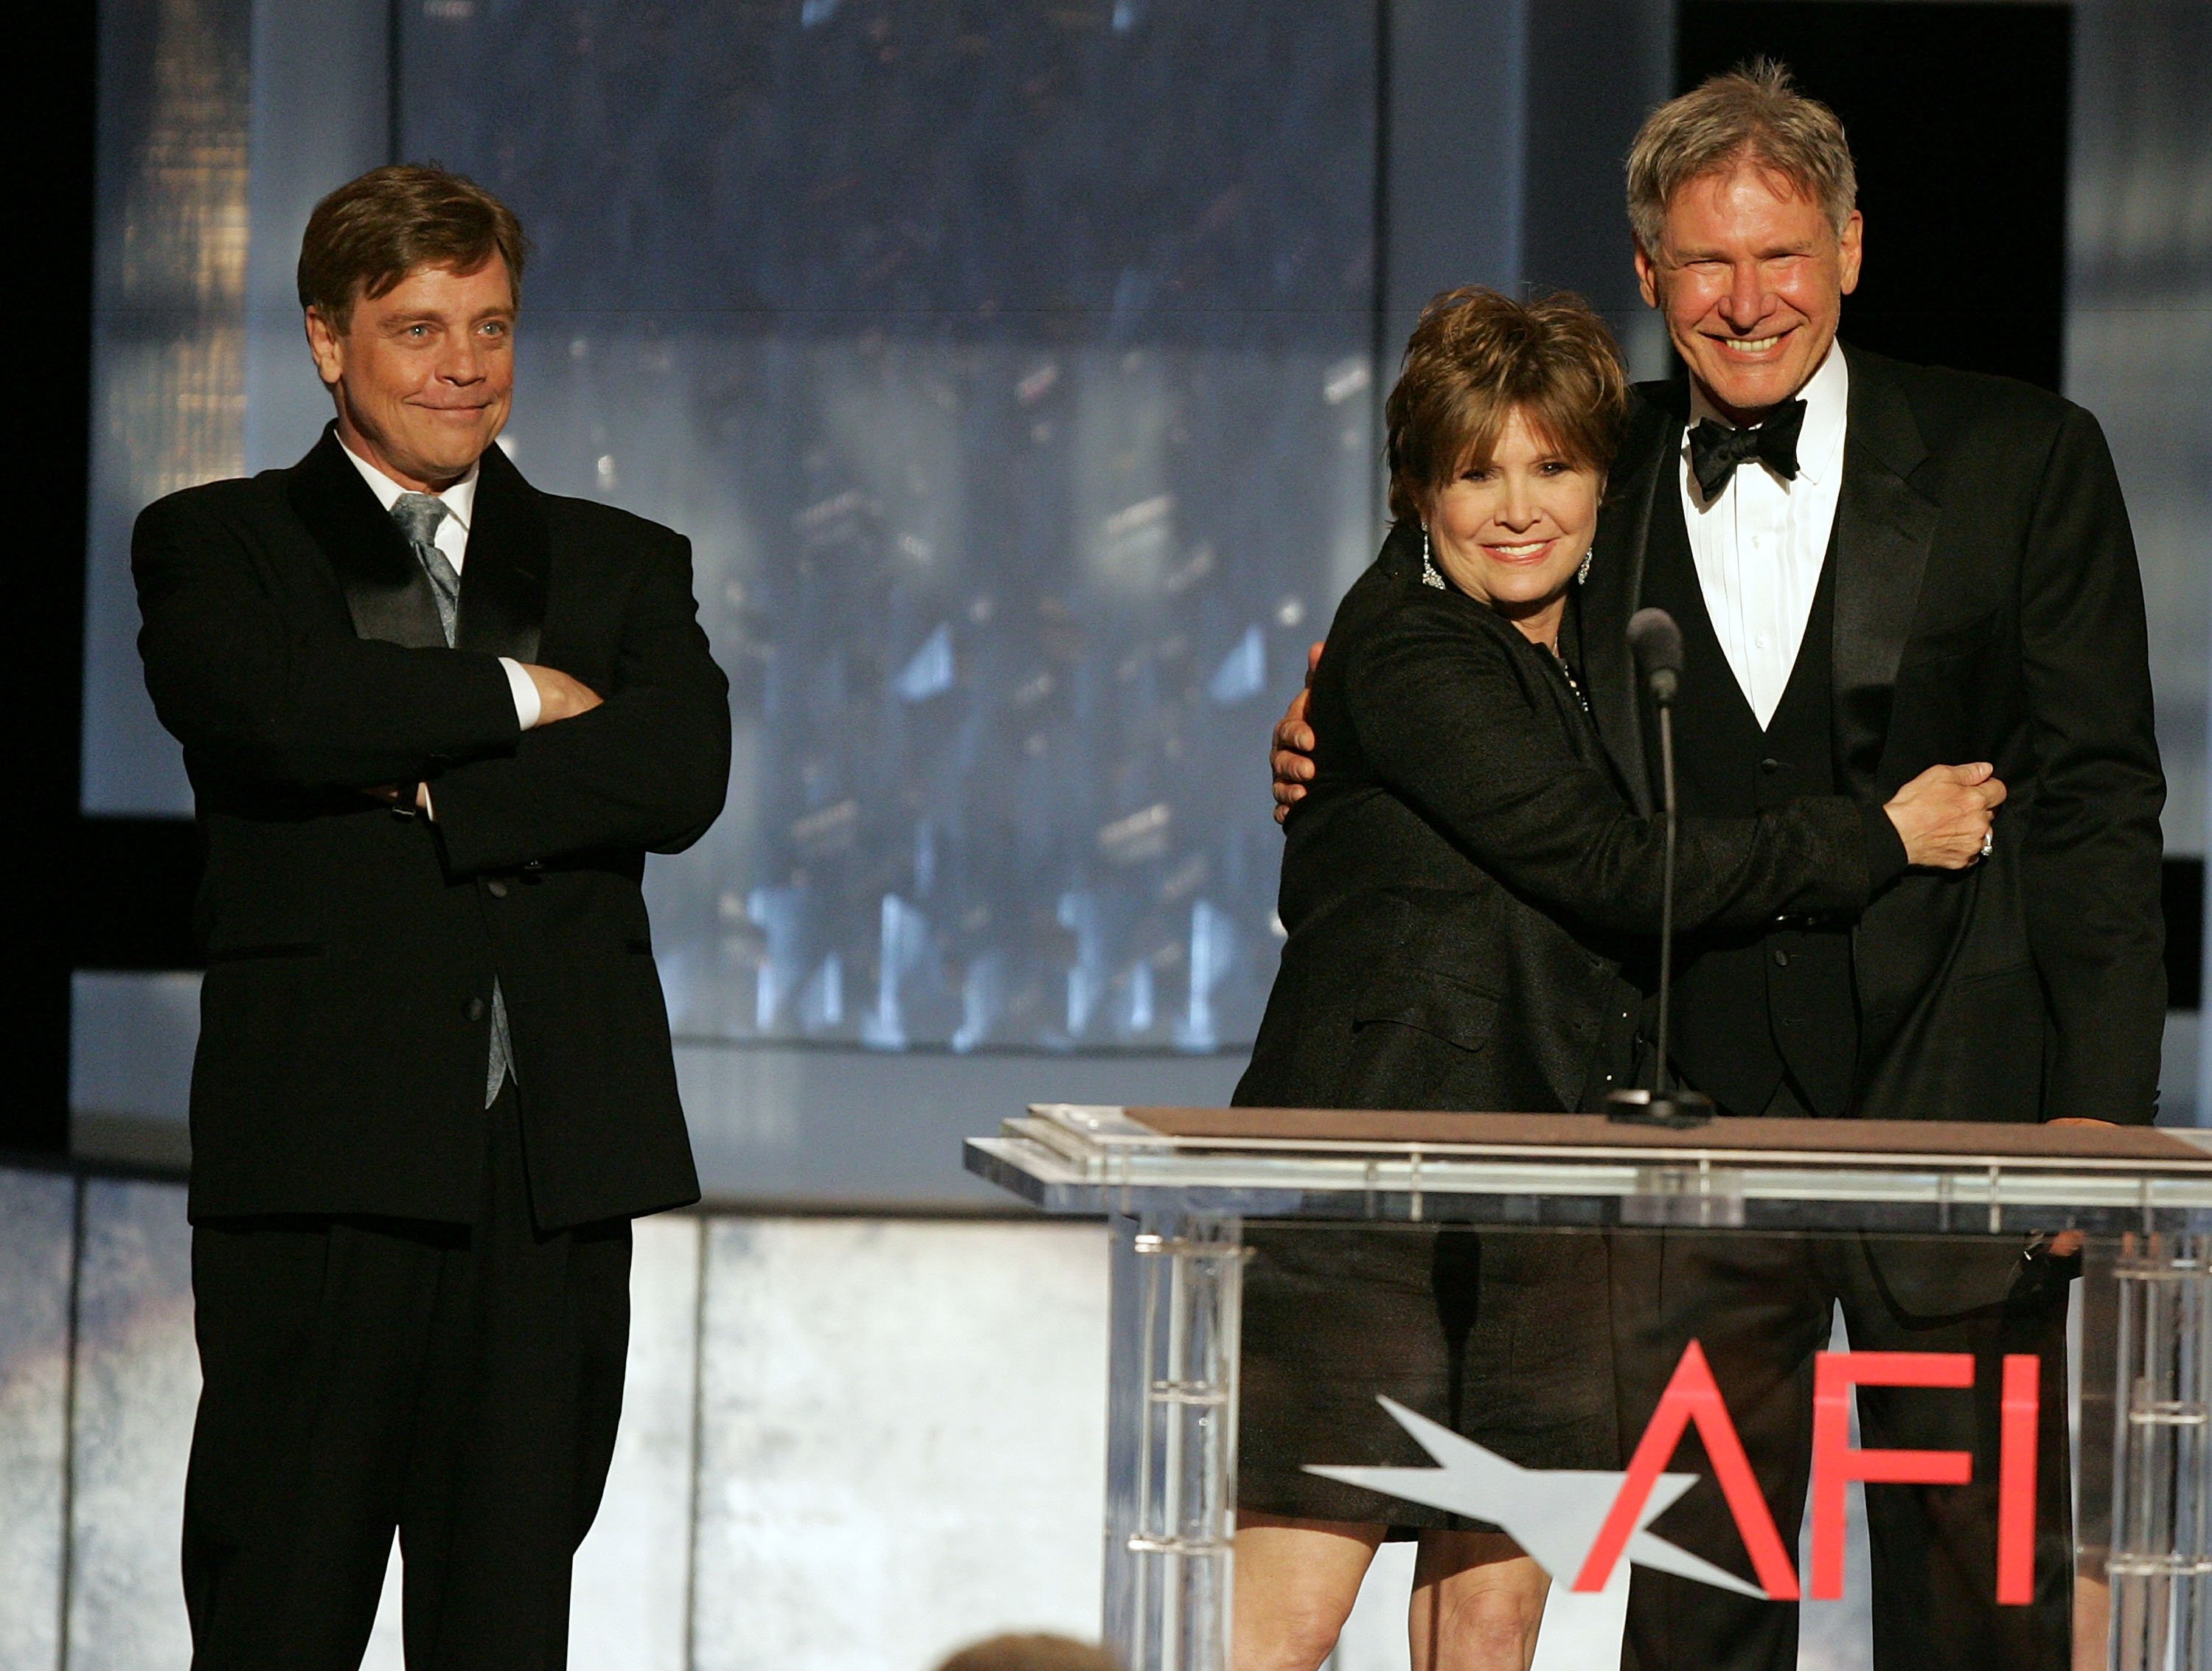 HOLLYWOOD - JUNE 09: (L-R) Actors Mark Hamill, Carrie Fisher and Harrison Ford speak onstage during the 33rd AFI Life Achievement Award tribute to George Lucas at the Kodak Theatre on June 9, 2005 in Hollywood, California.